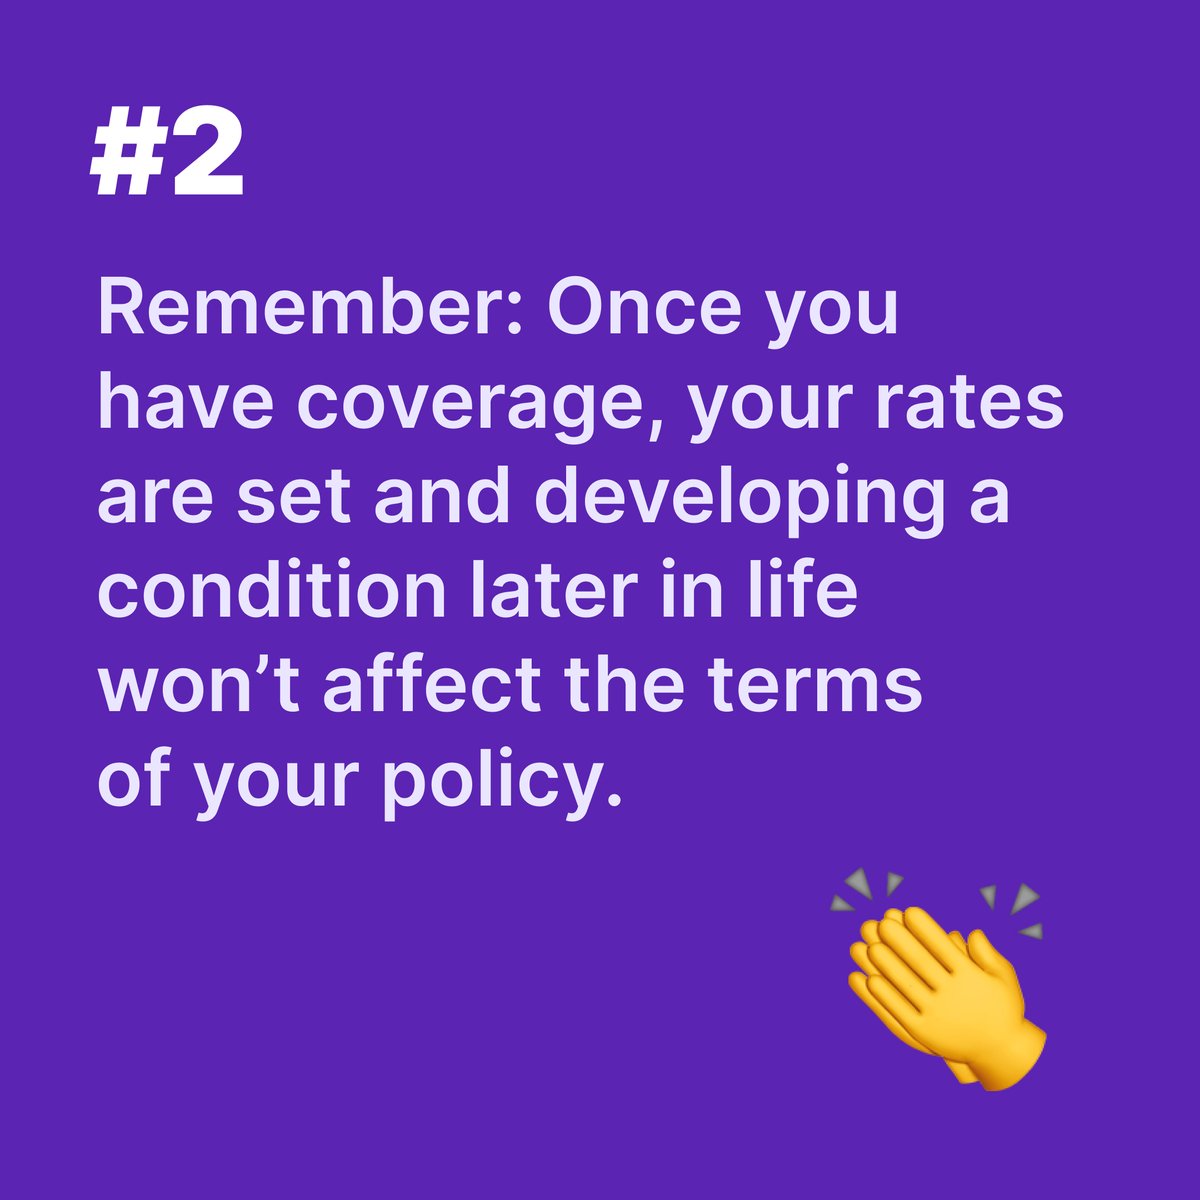 Ever wondered how pre-existing conditions might affect your ability to get coverage? Our blog post highlights 7 conditions that might make getting coverage a little more difficult. meetfabric.com/blog/what-pre-…